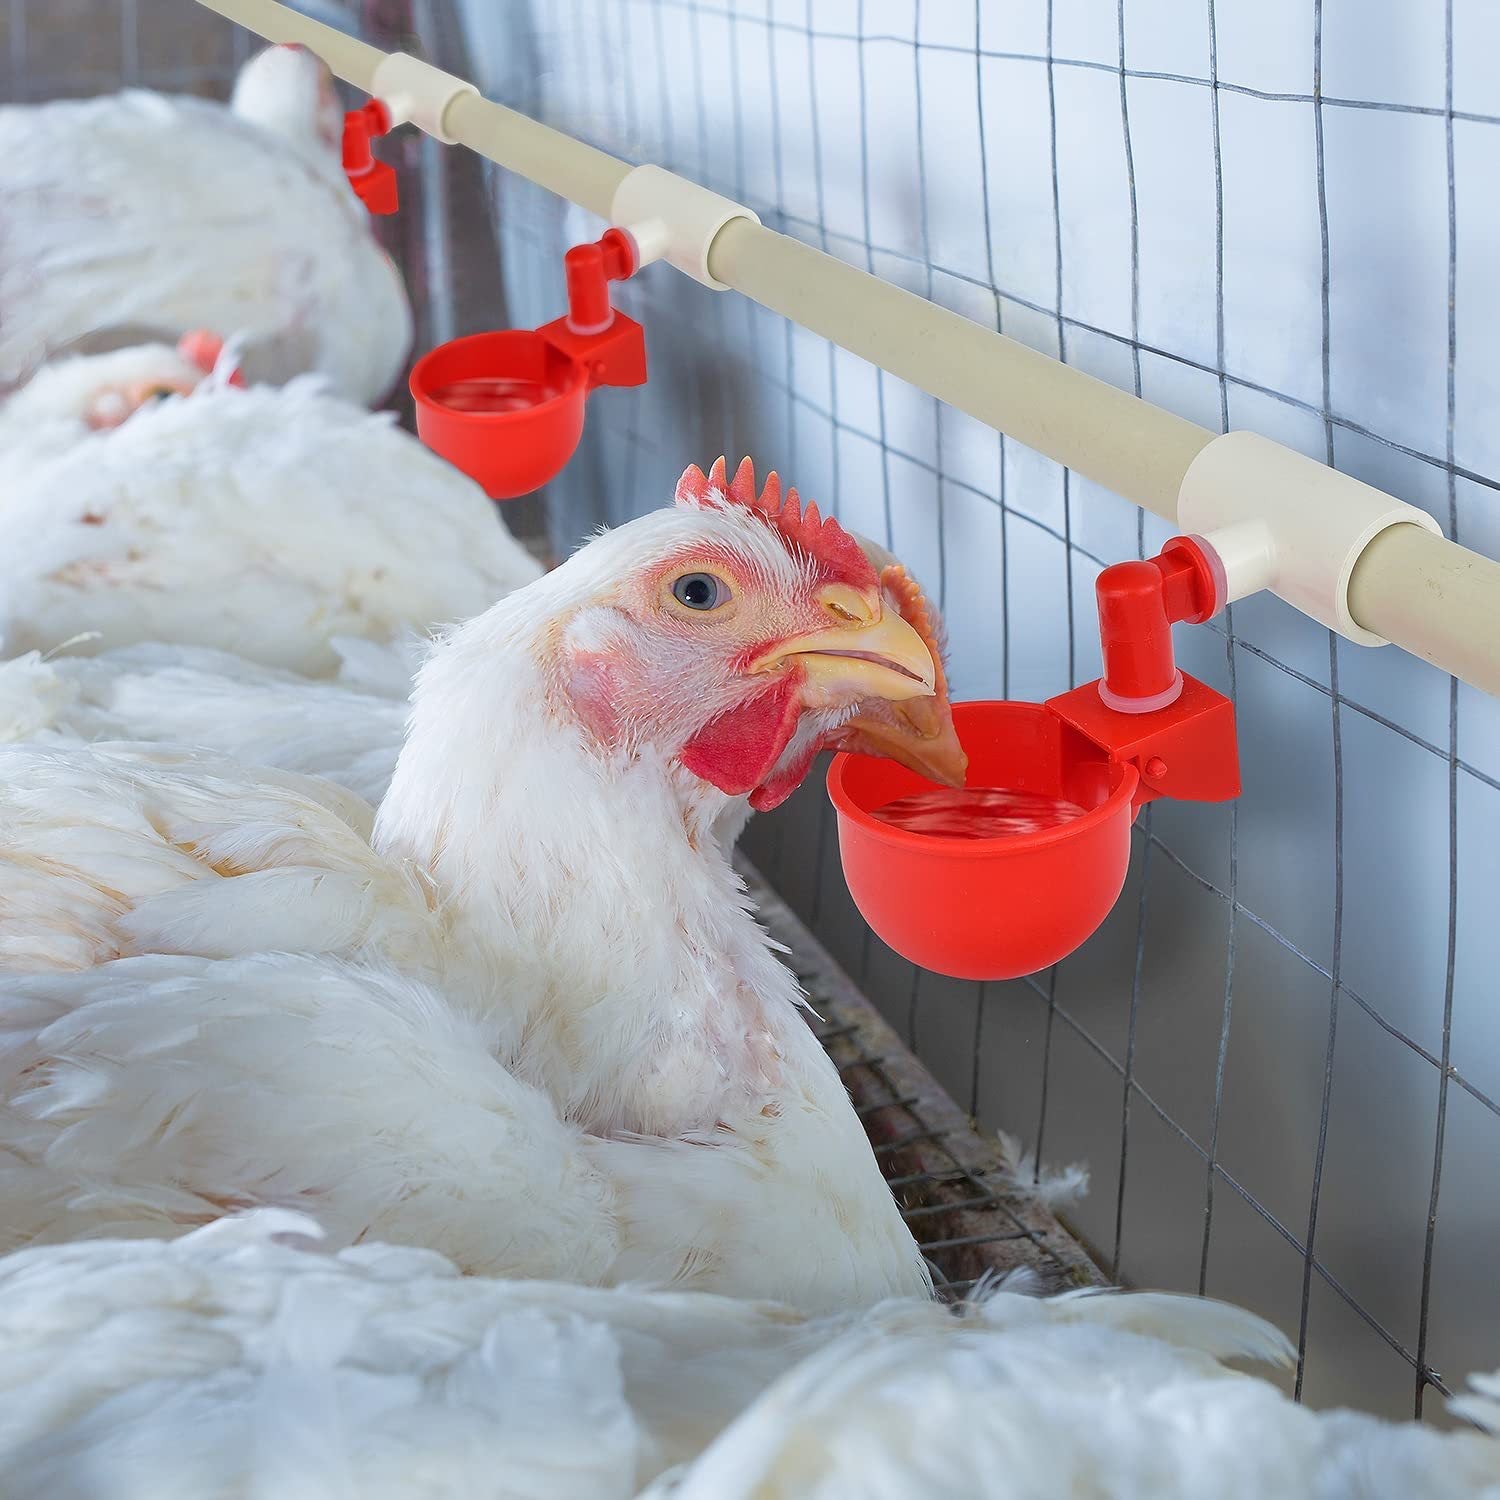 Advantages of using a self-regulating poultry water system